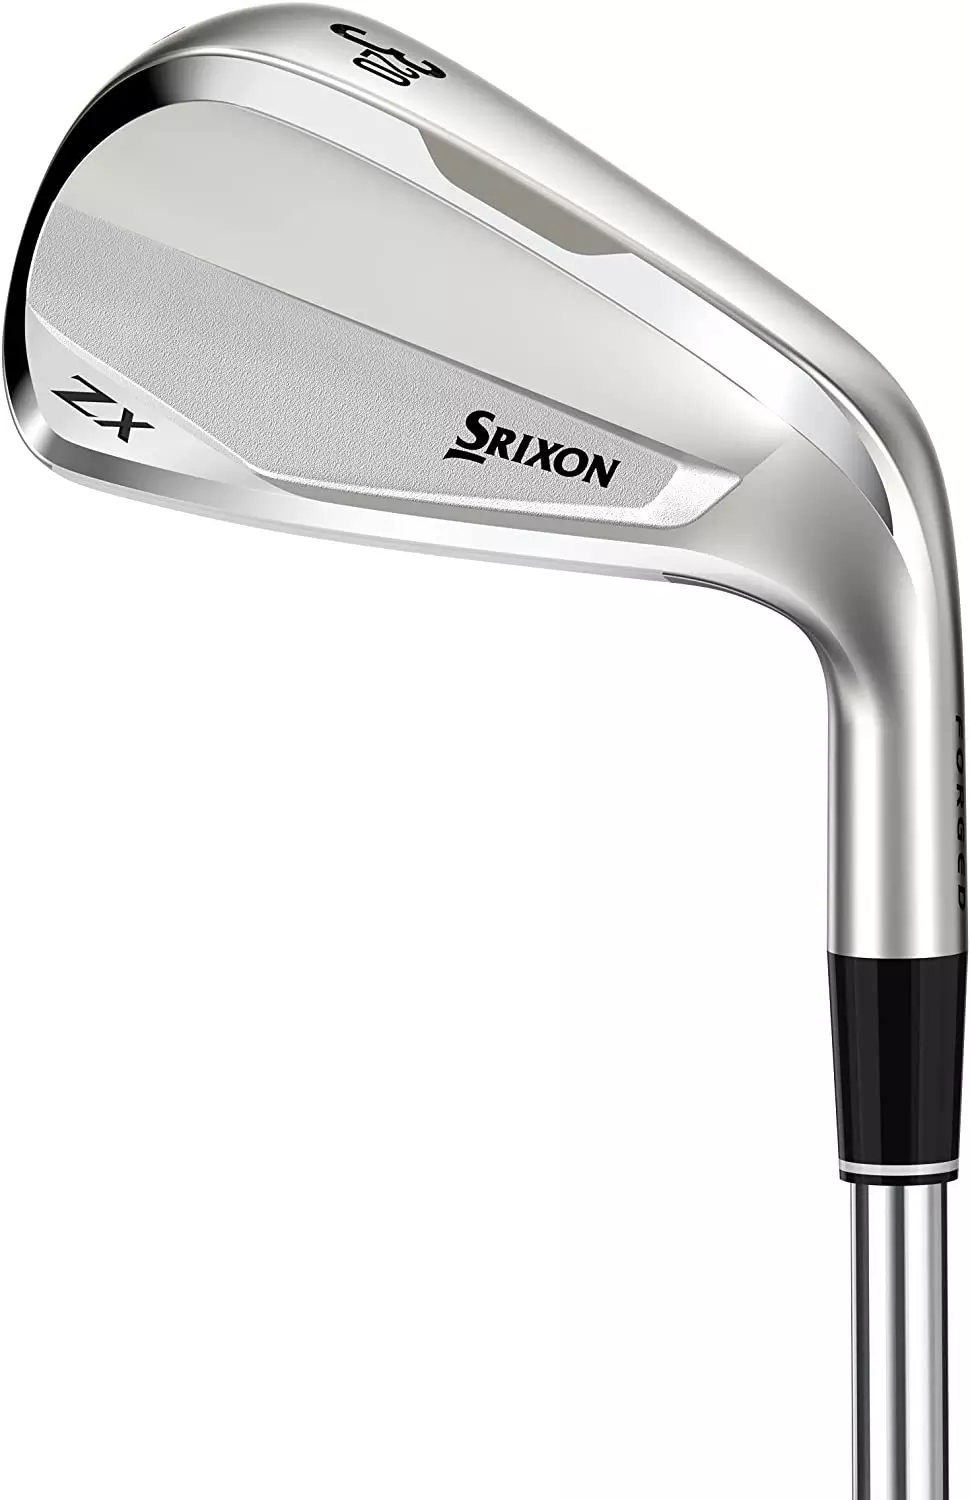 solid silver and chrome club that looks very much like a standard iron and utility club with a blade like look and incredible forgiveness for a driving iron